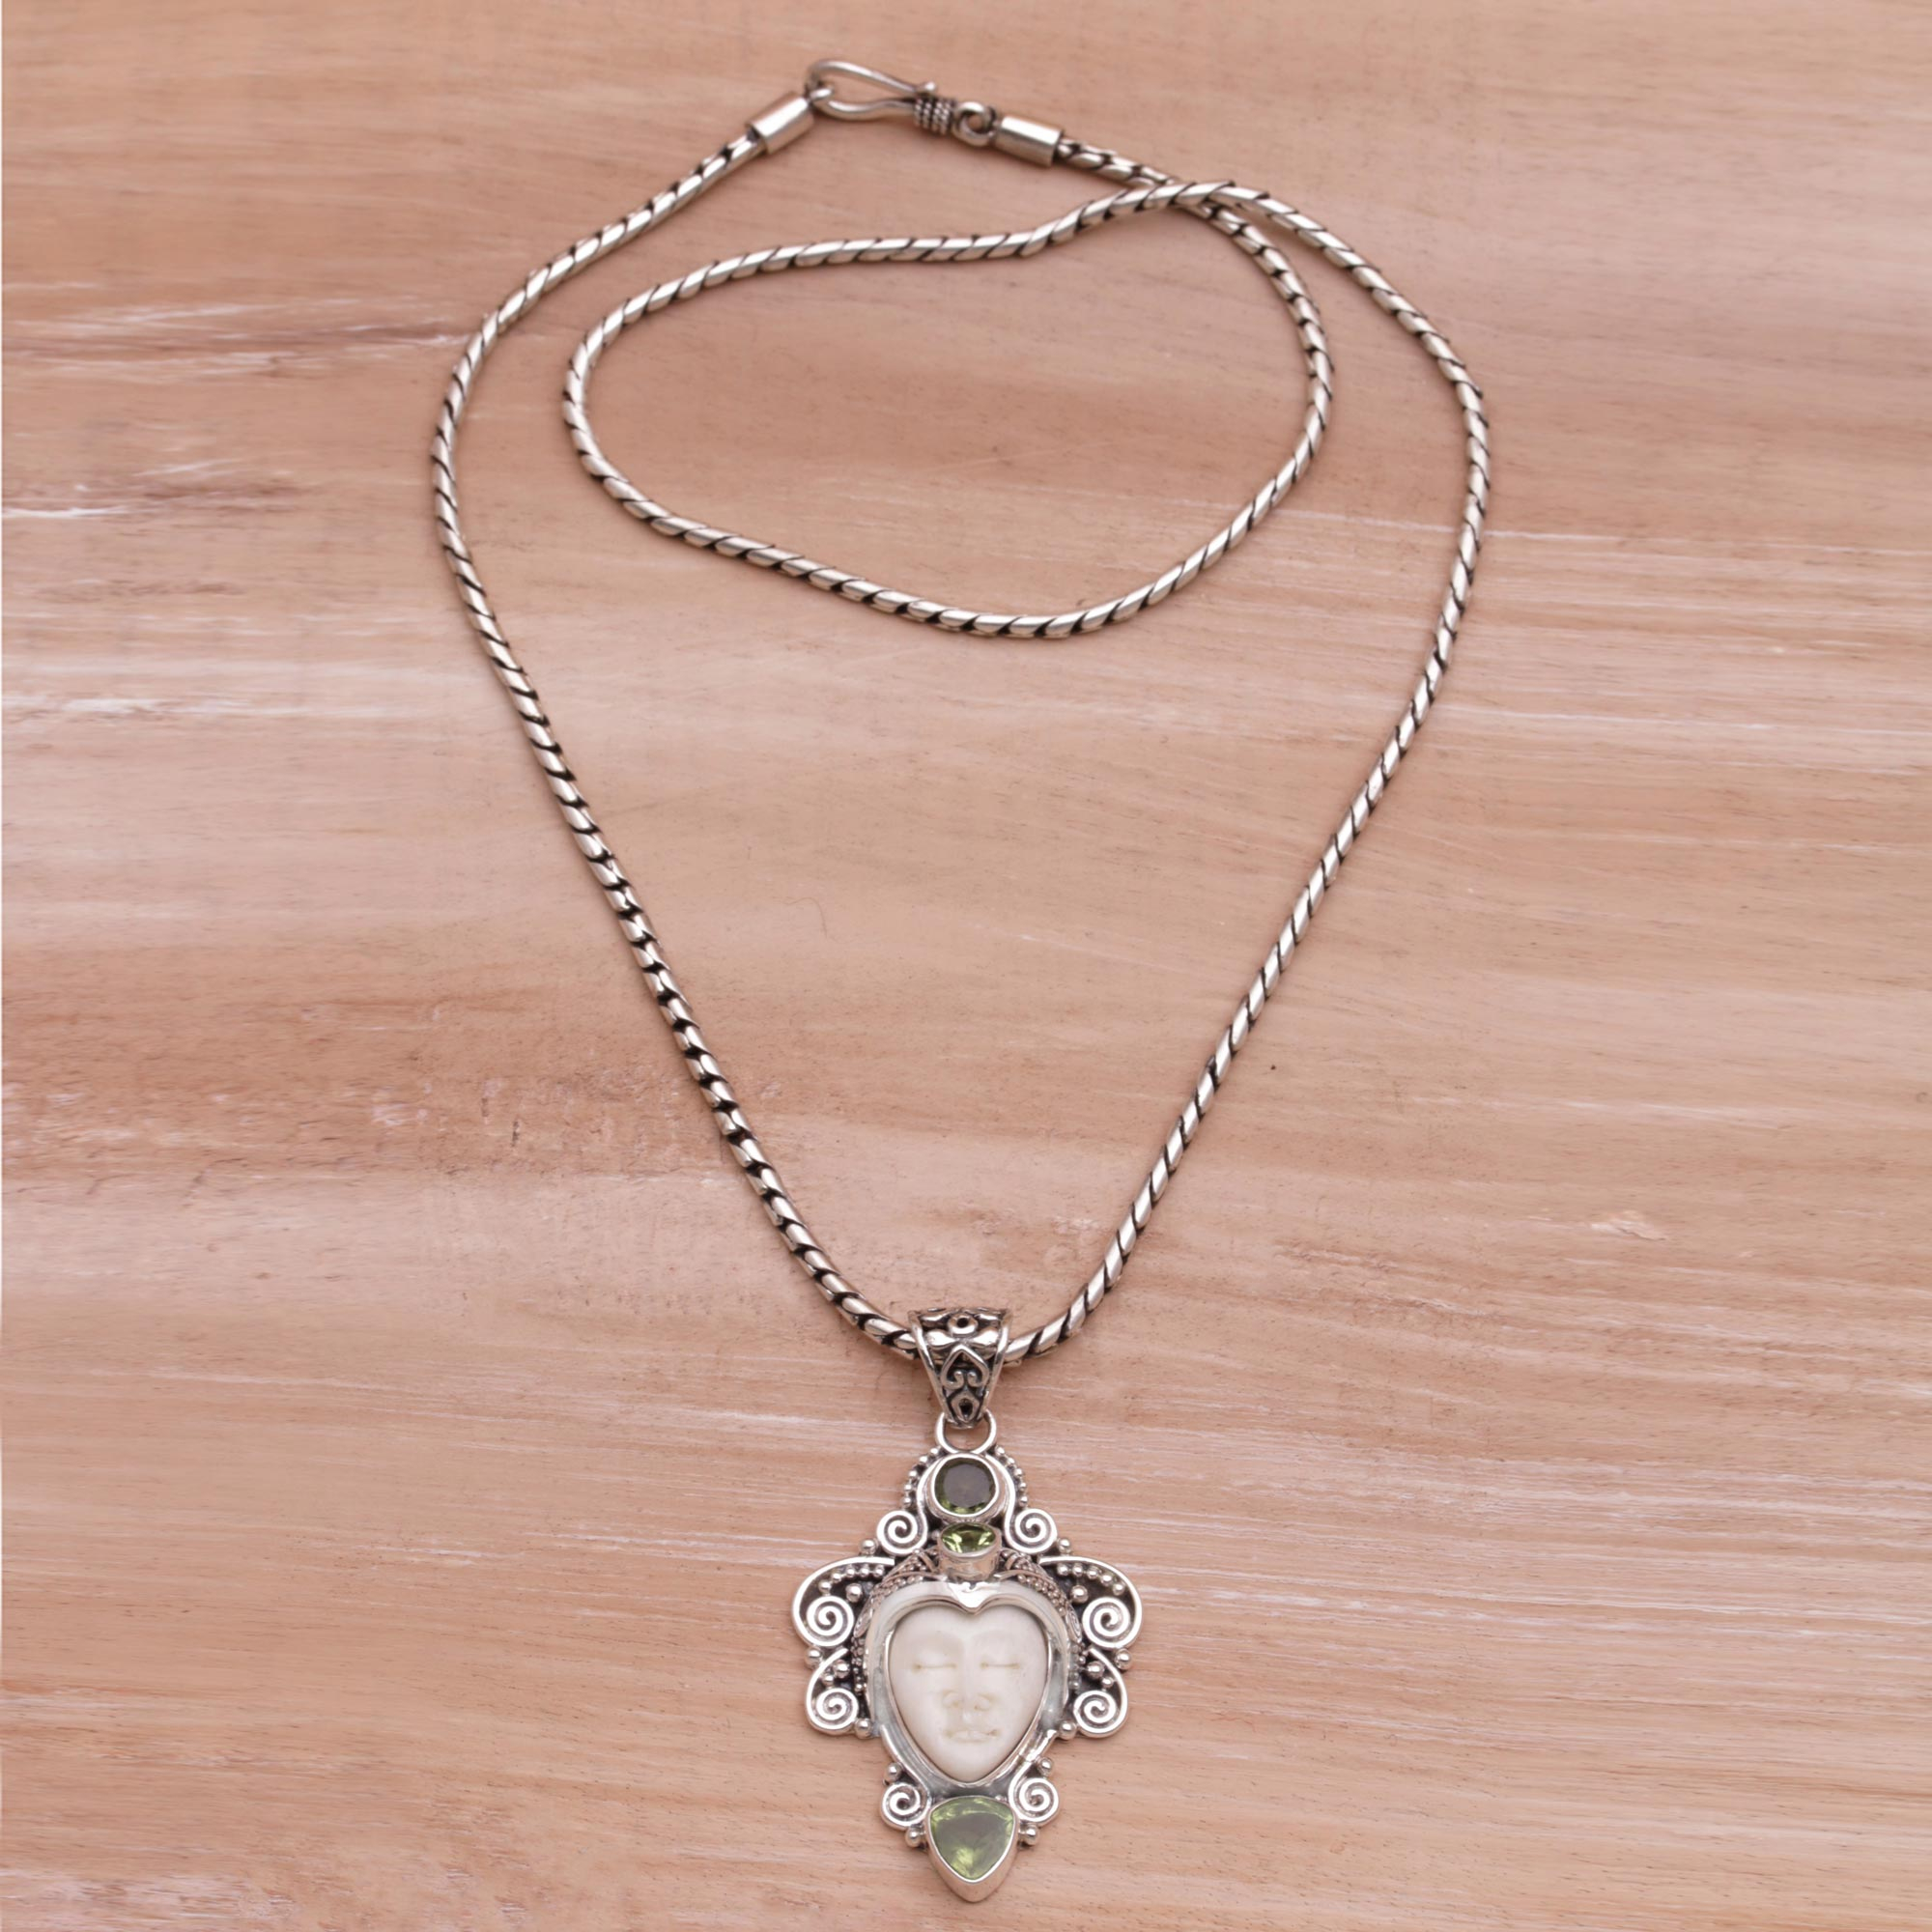 925 STERLING SILVER FROG PENDANT NECKLACE W/ 7 CT PERIDOT & ACCENTS/18''CHAIN